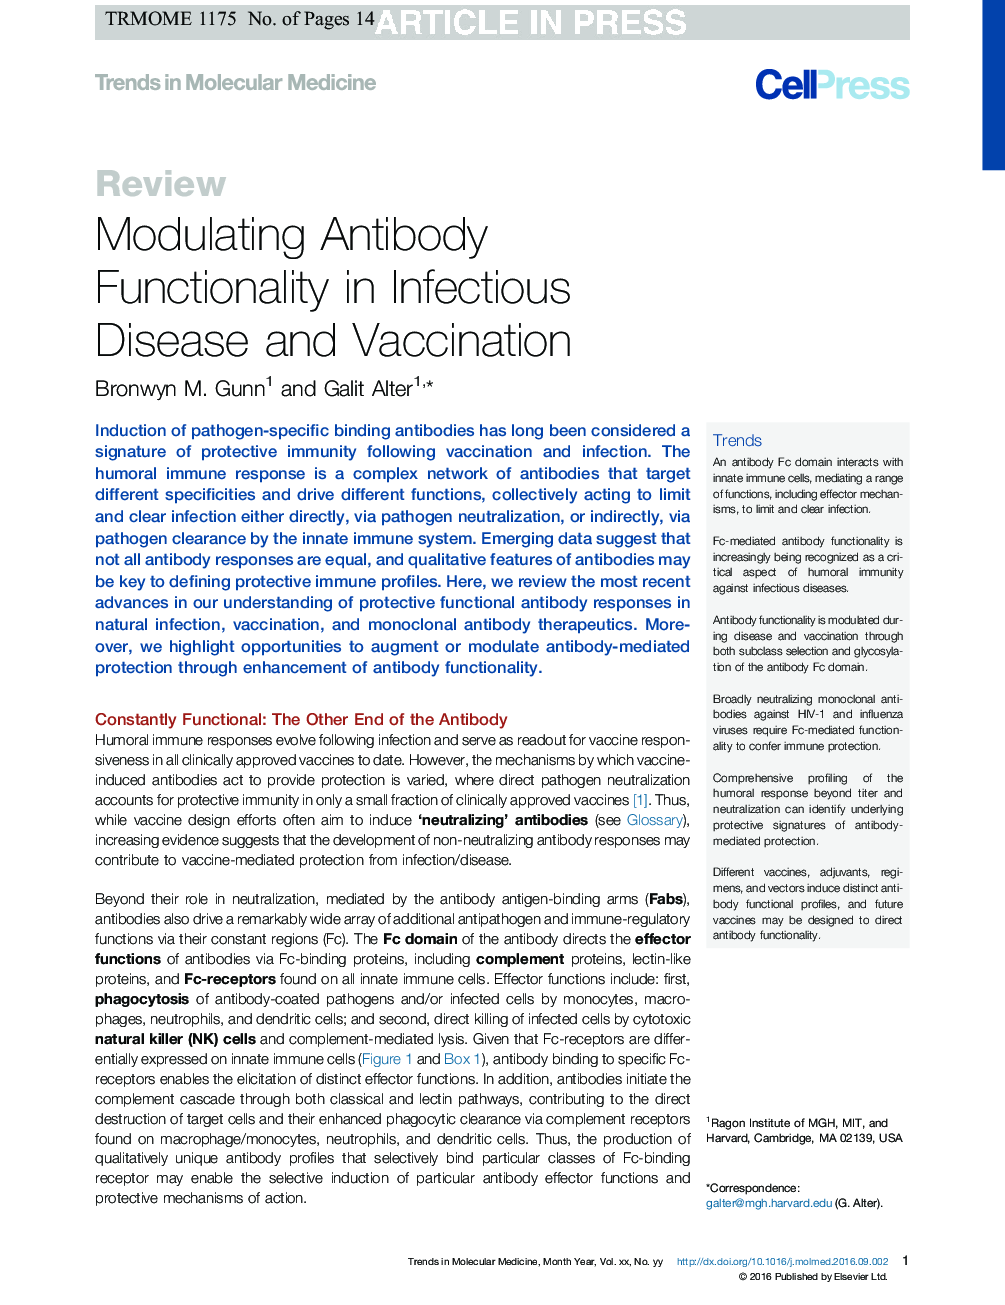 Modulating Antibody Functionality in Infectious Disease and Vaccination